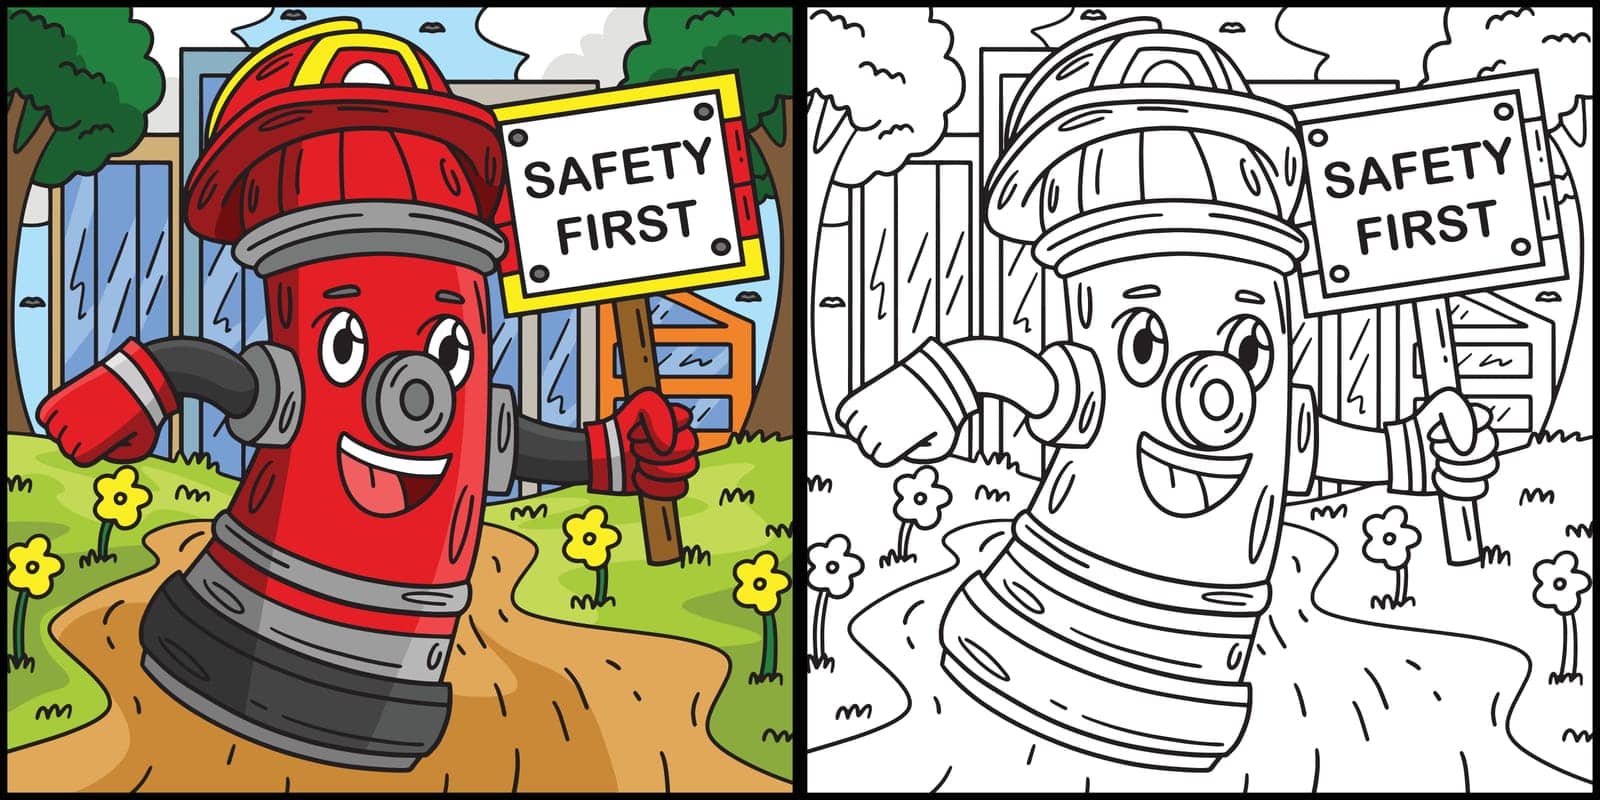 This coloring page shows a Firefighter Fire Hydrant. One side of this illustration is colored and serves as an inspiration for children.